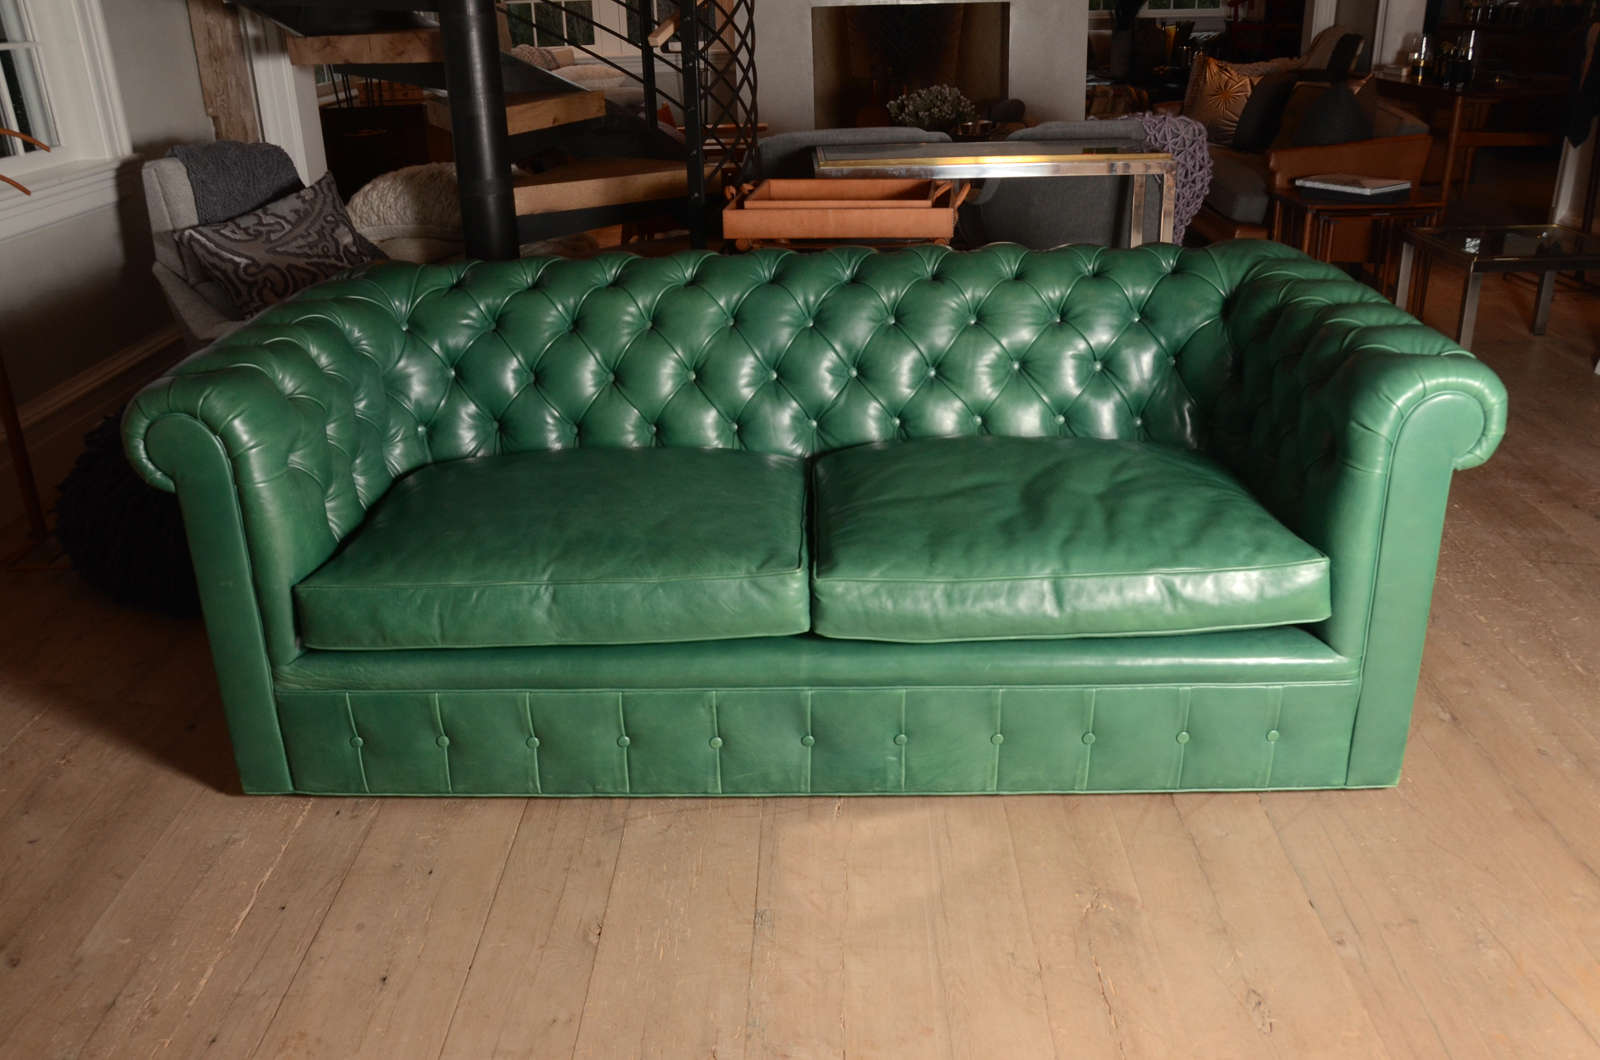 Emerald Green Midcentury Chesterfield Sofa from England For Sale at 1stDibs